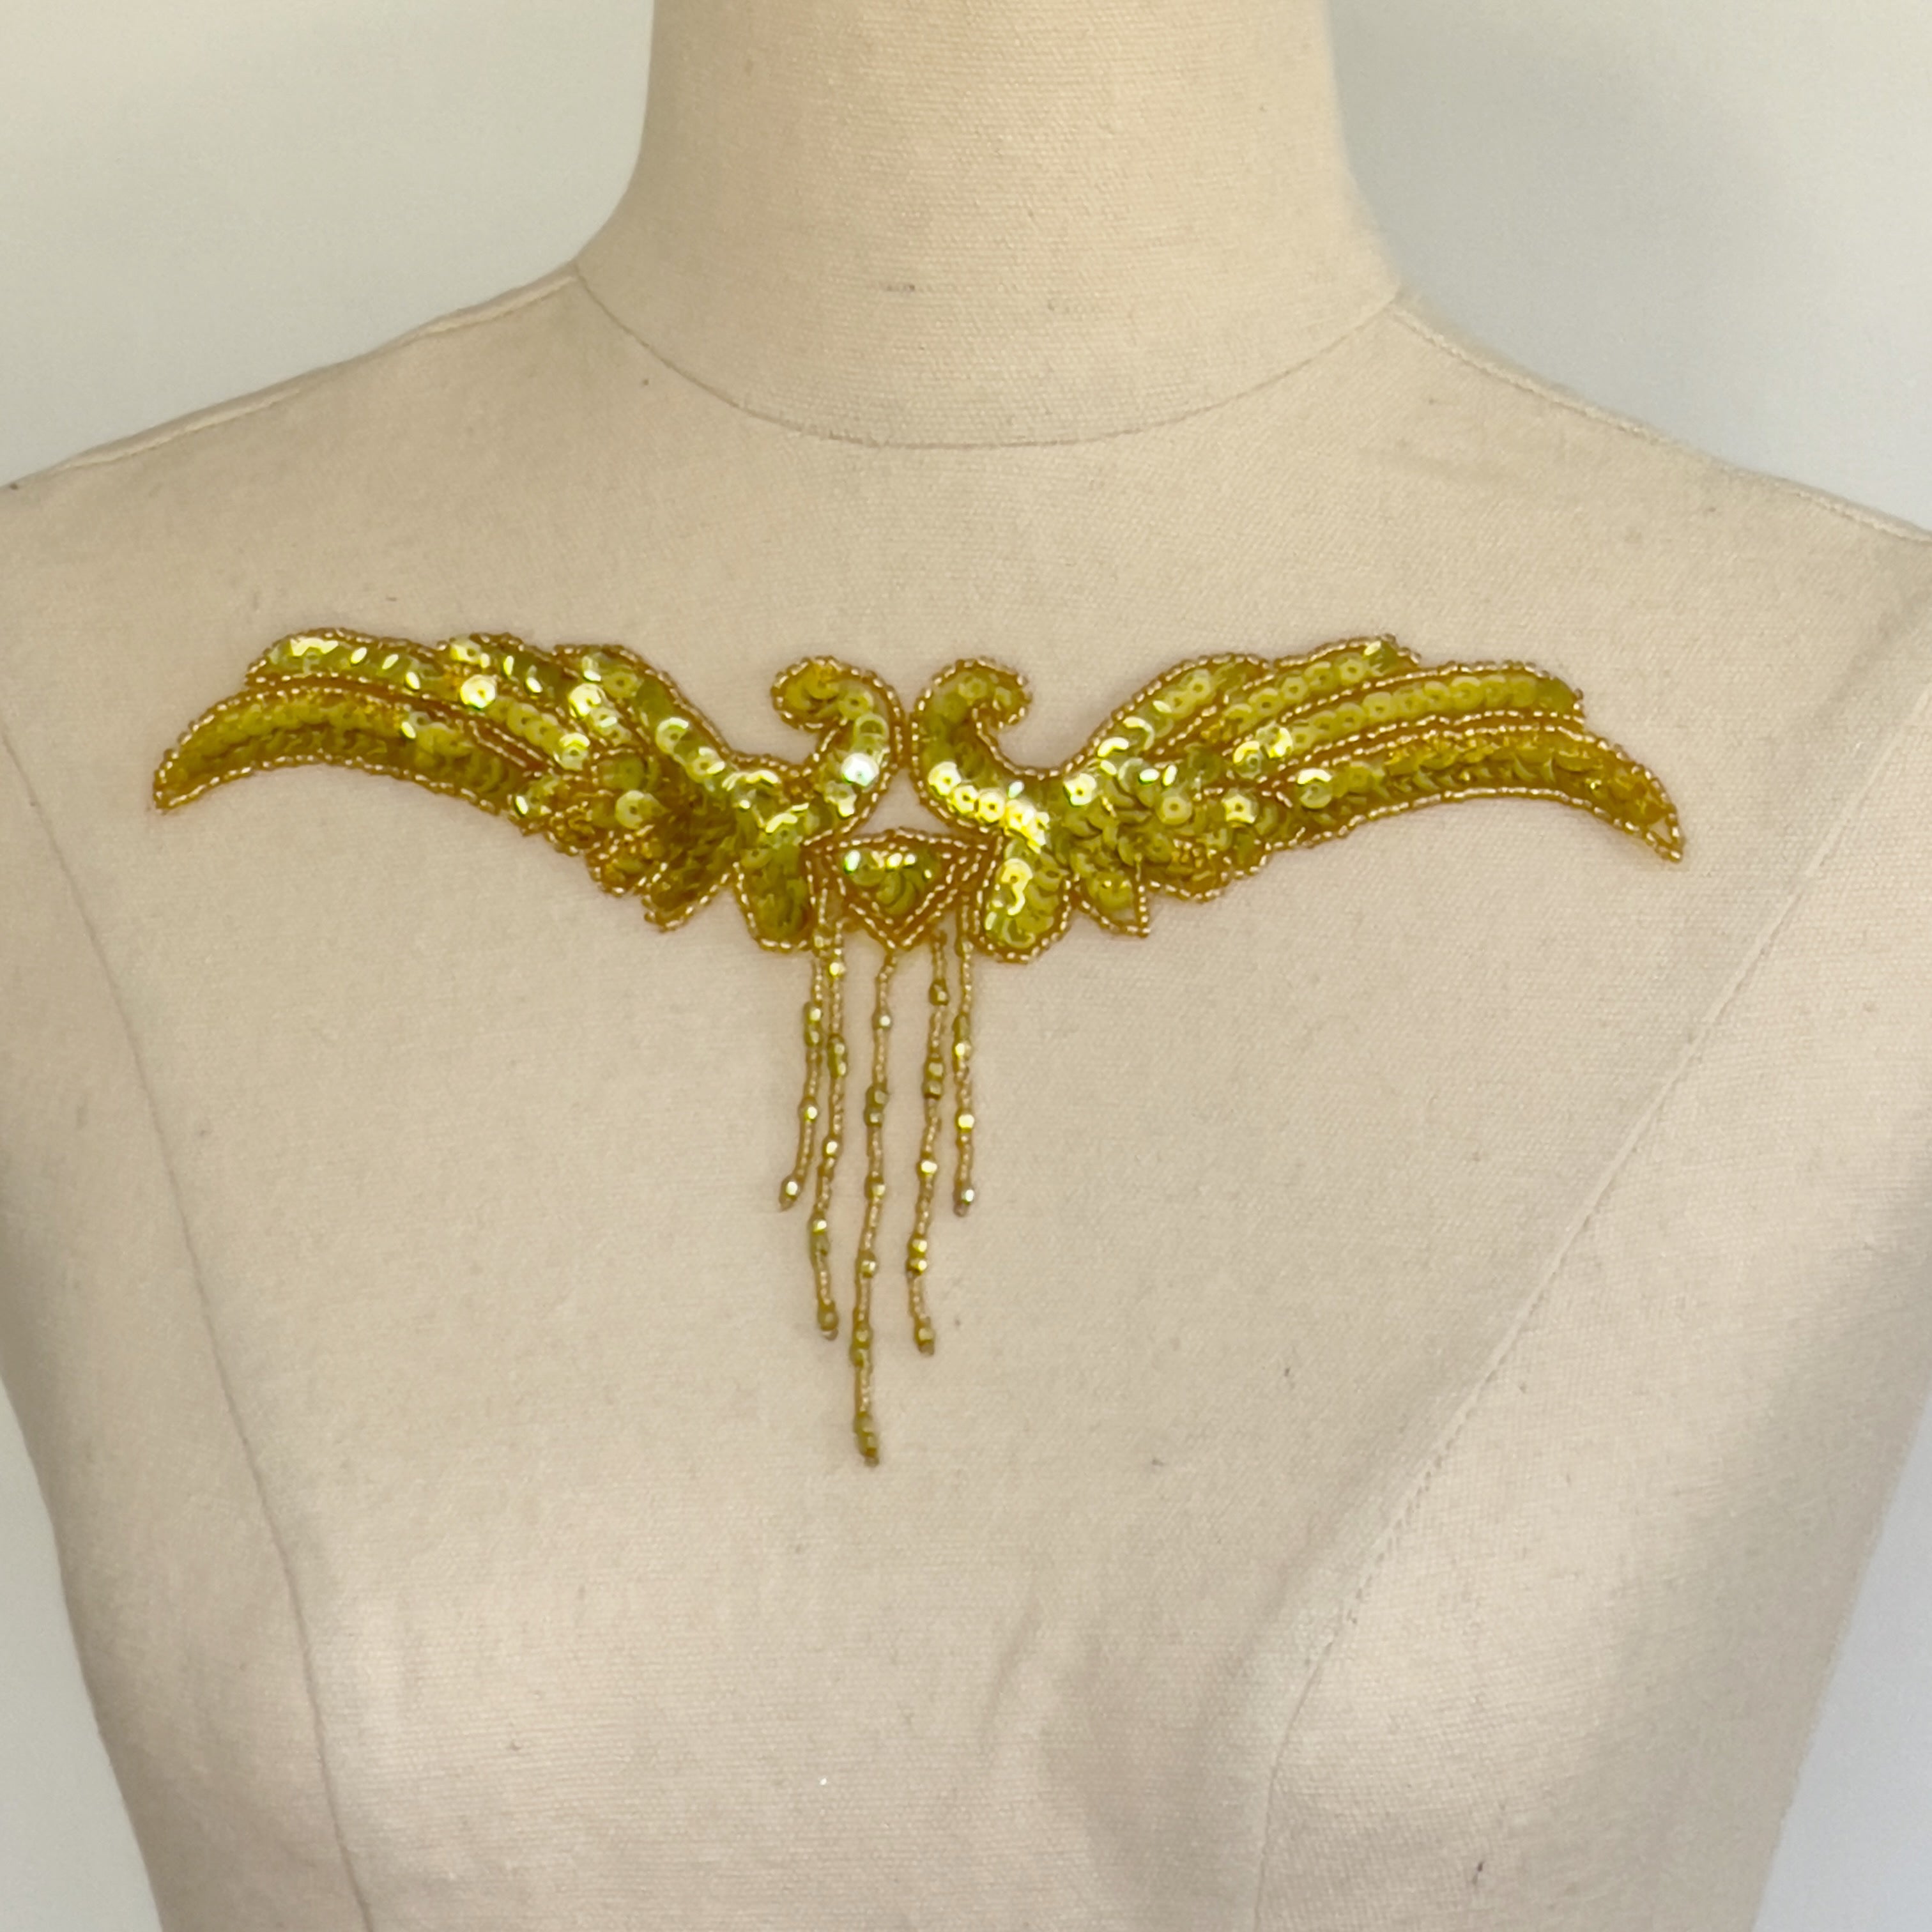 Gold sequinned bodice applique edged with gold seed beads.  The centre front has a five strand seed bead fringe.  The applique is displayed on a mannequin.    